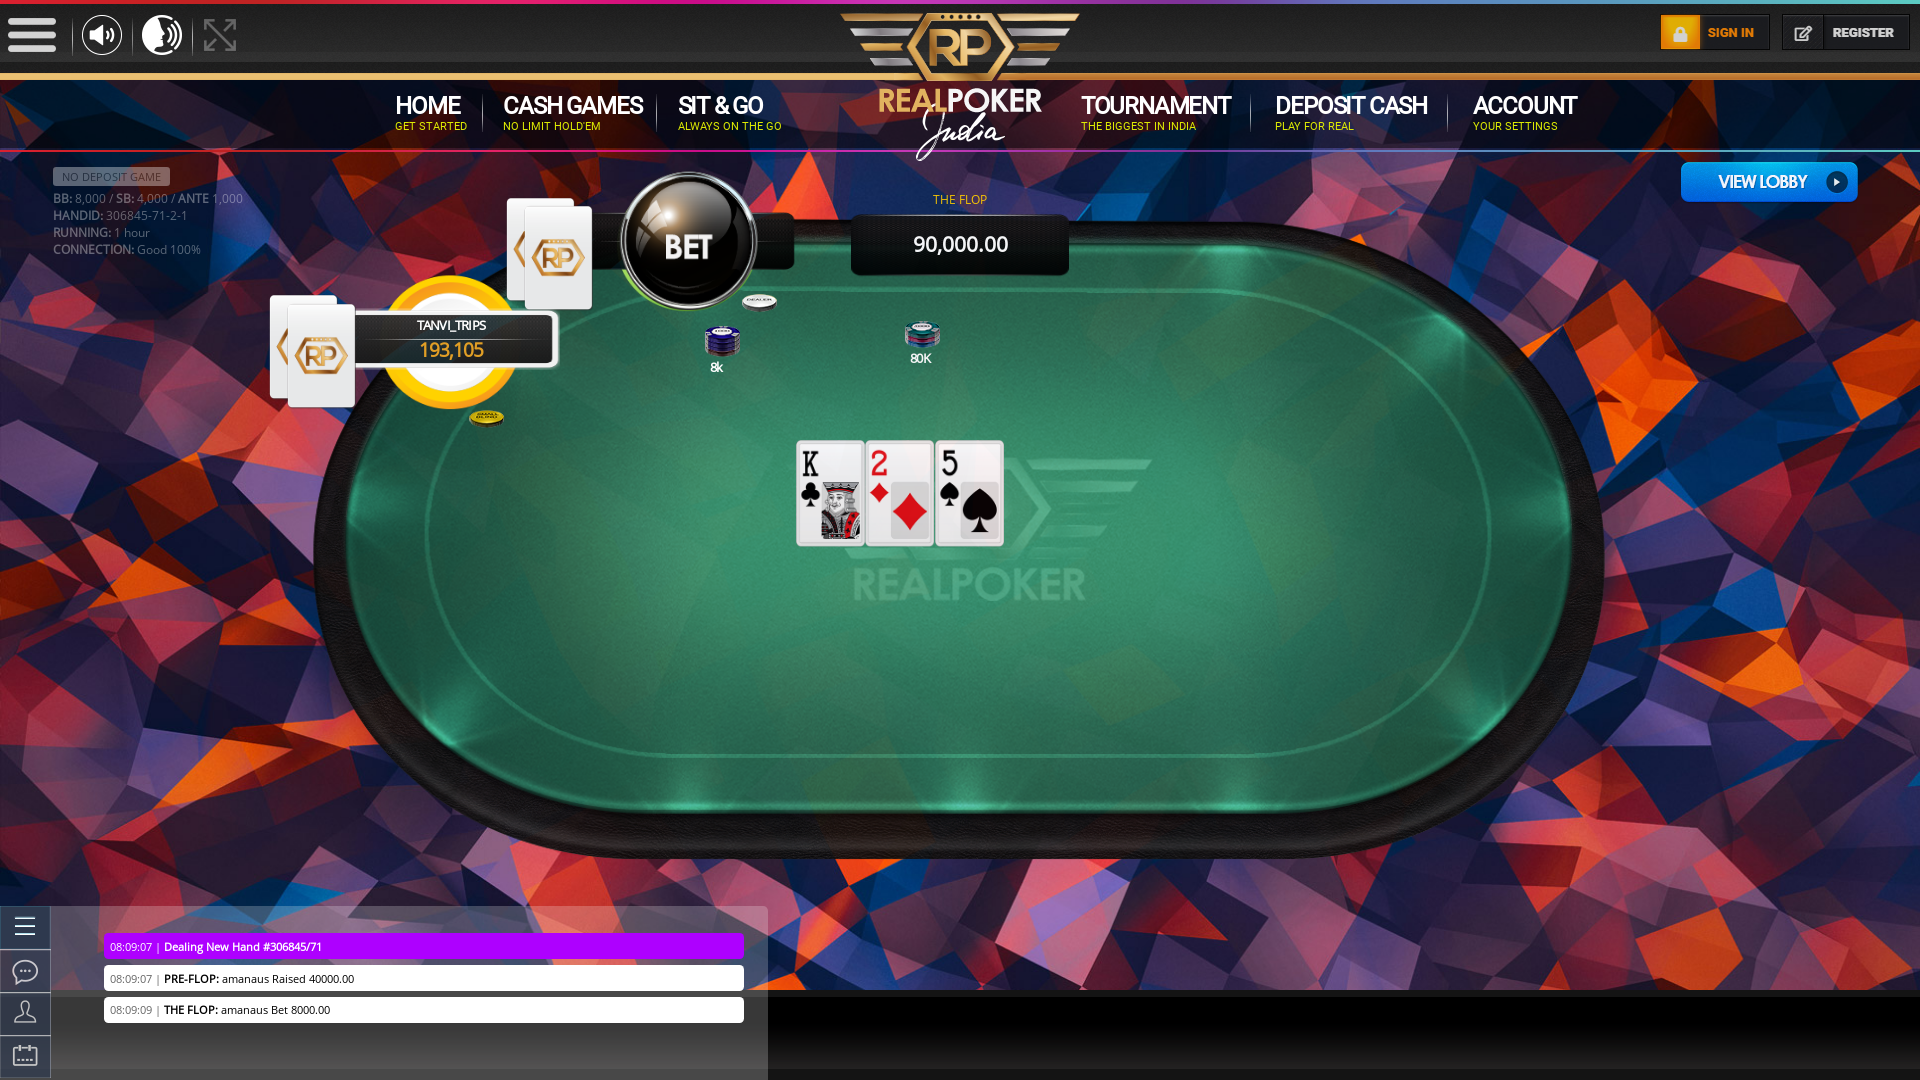 Indian poker on a 10 player table in the 85th minute